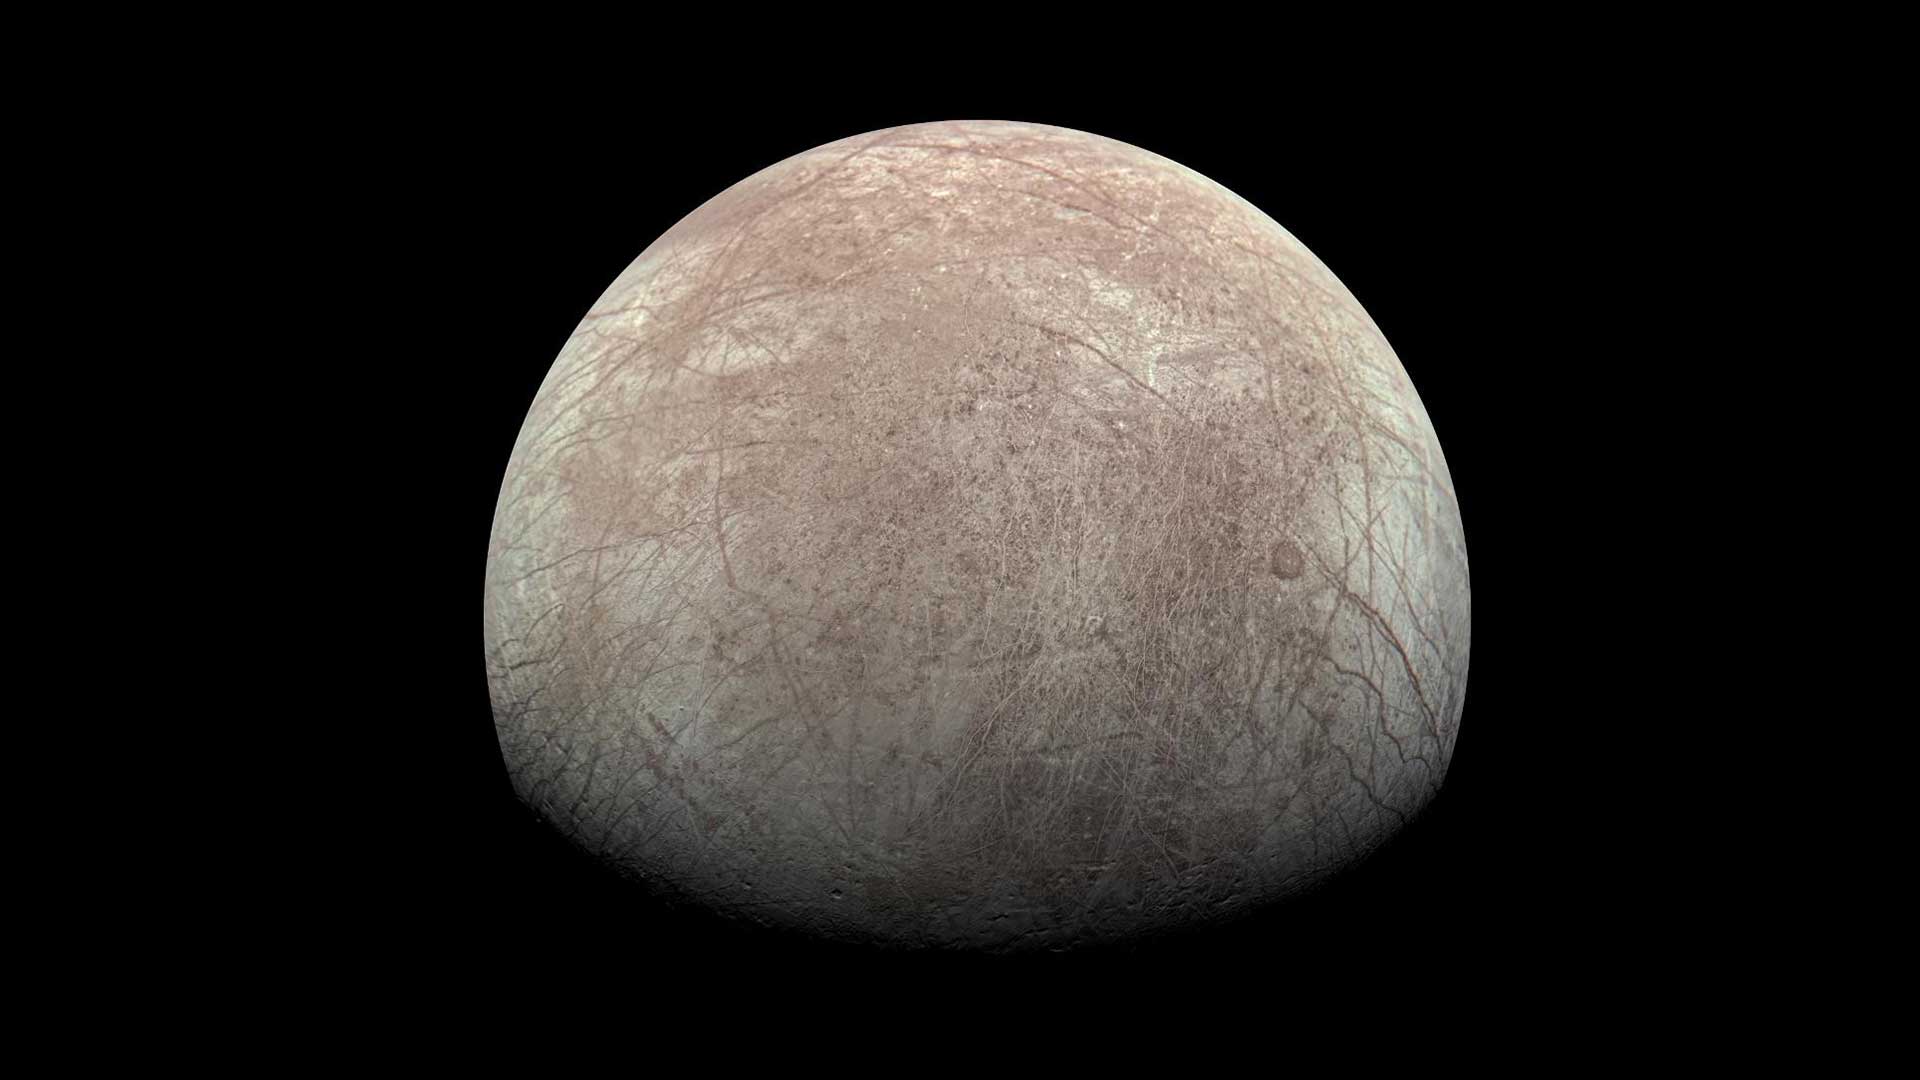 A view of Europa showing most of one side of the moon. The moon is gray with reddish bands running across it.